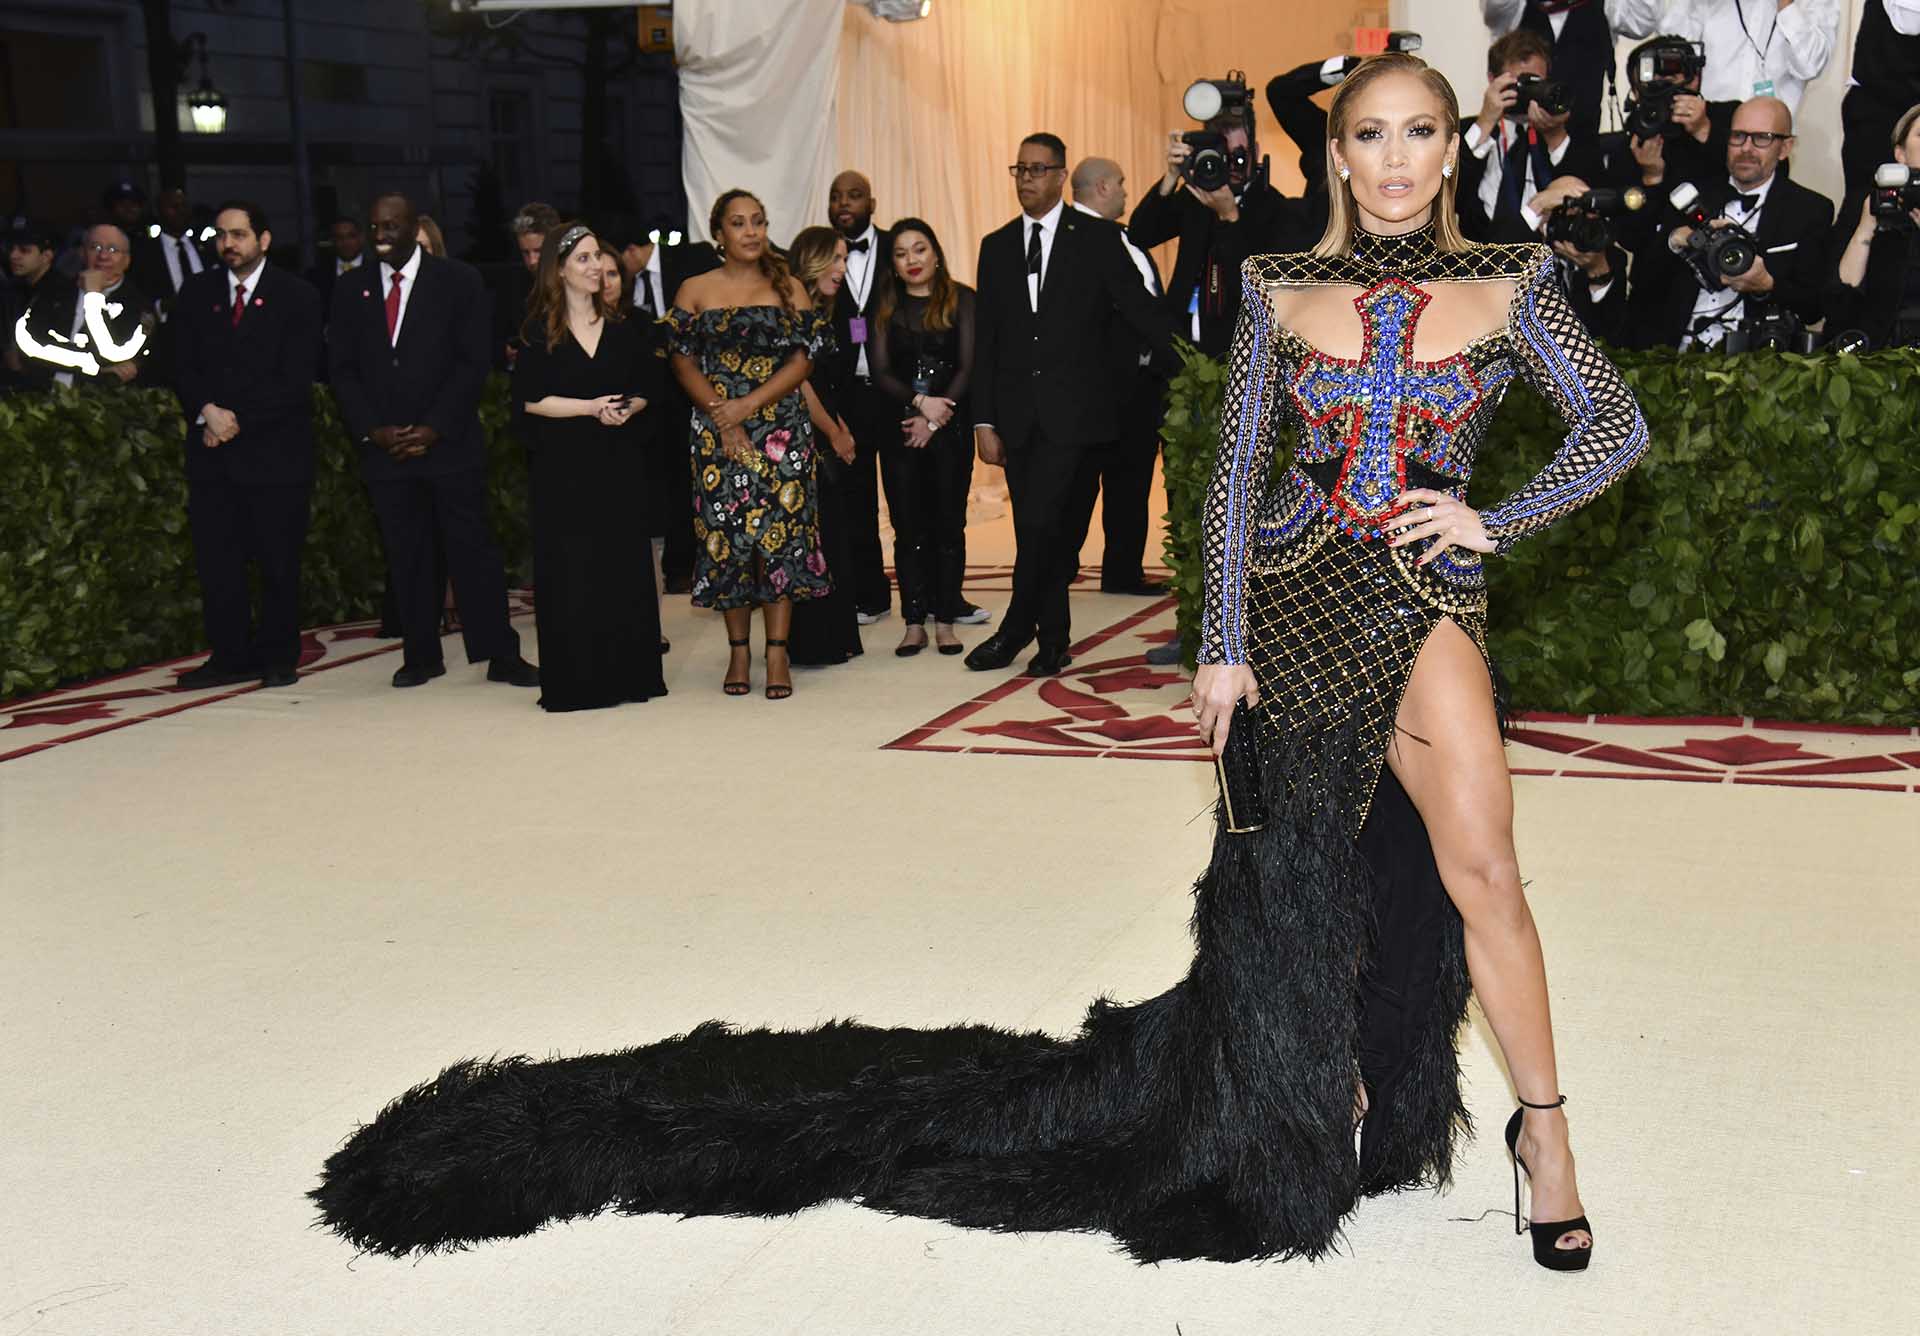 Actress and singer Jennifer Lopez at the Metropolitan Museum of Art Costume Institute Gala (Met Gala) to celebrate the opening of "Heavenly Bodies: Fashion and the Catholic Imagination" in New York, U.S., May 7, 2018